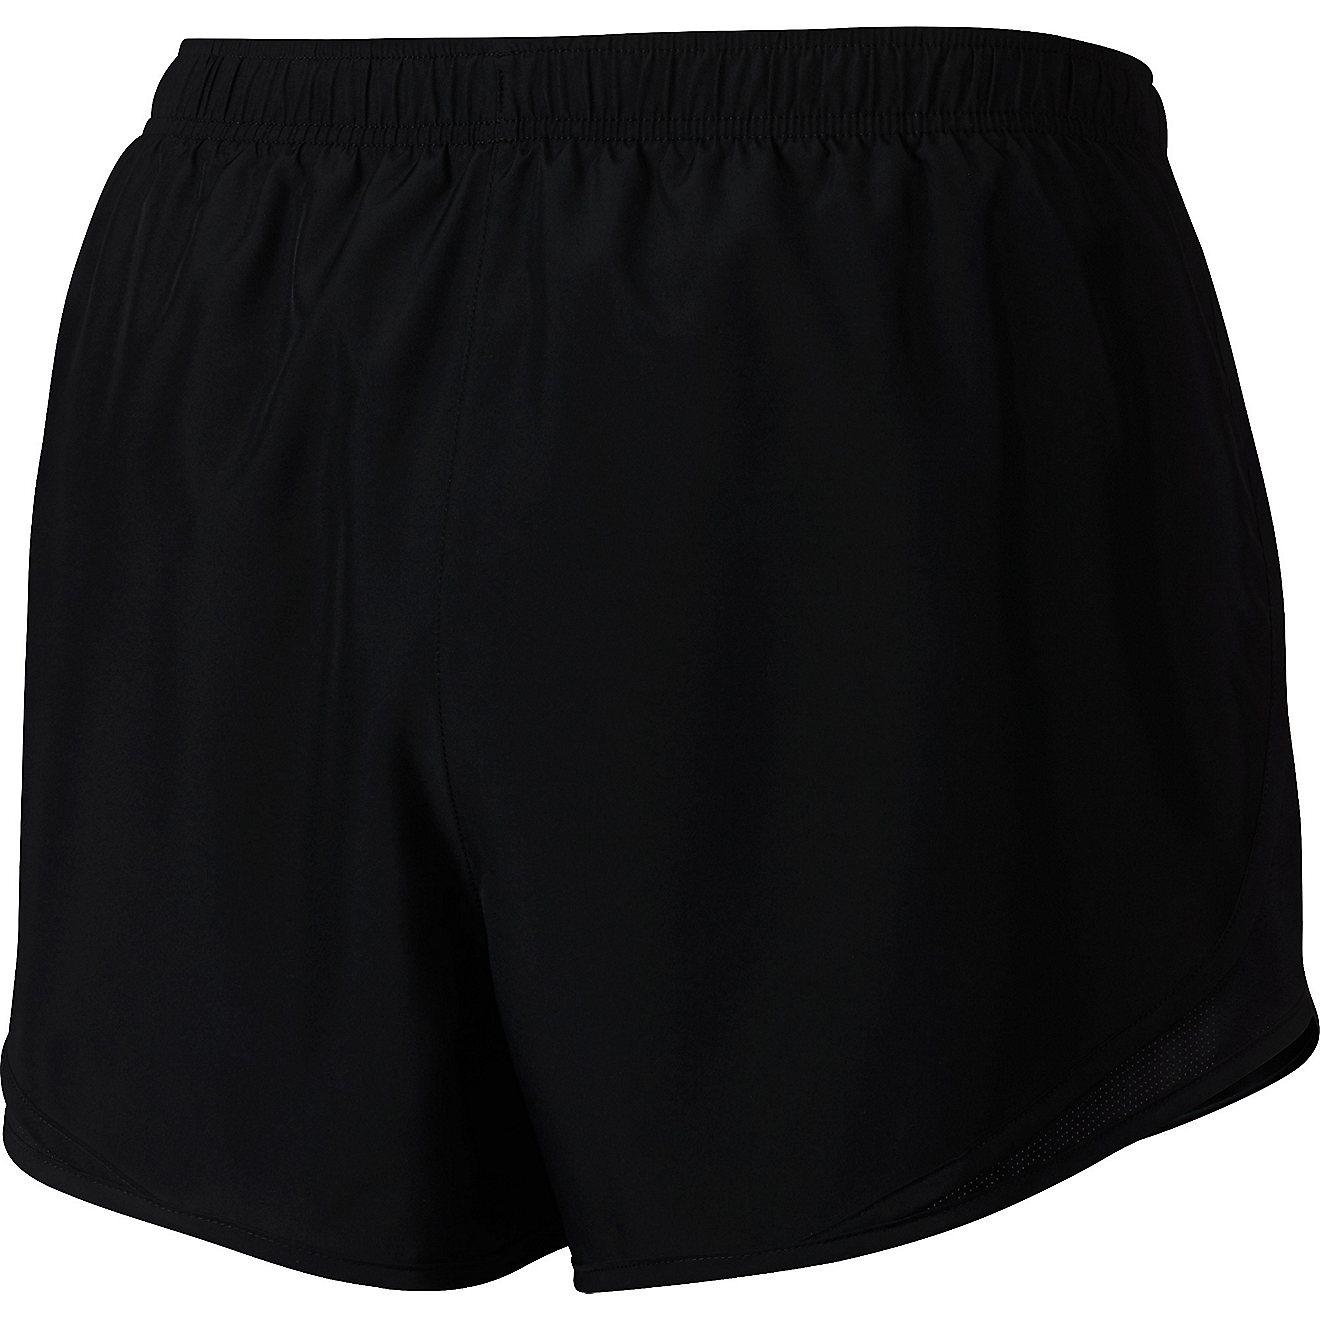 Nike Women's Dry Tempo Plus Size Shorts                                                                                          - view number 5